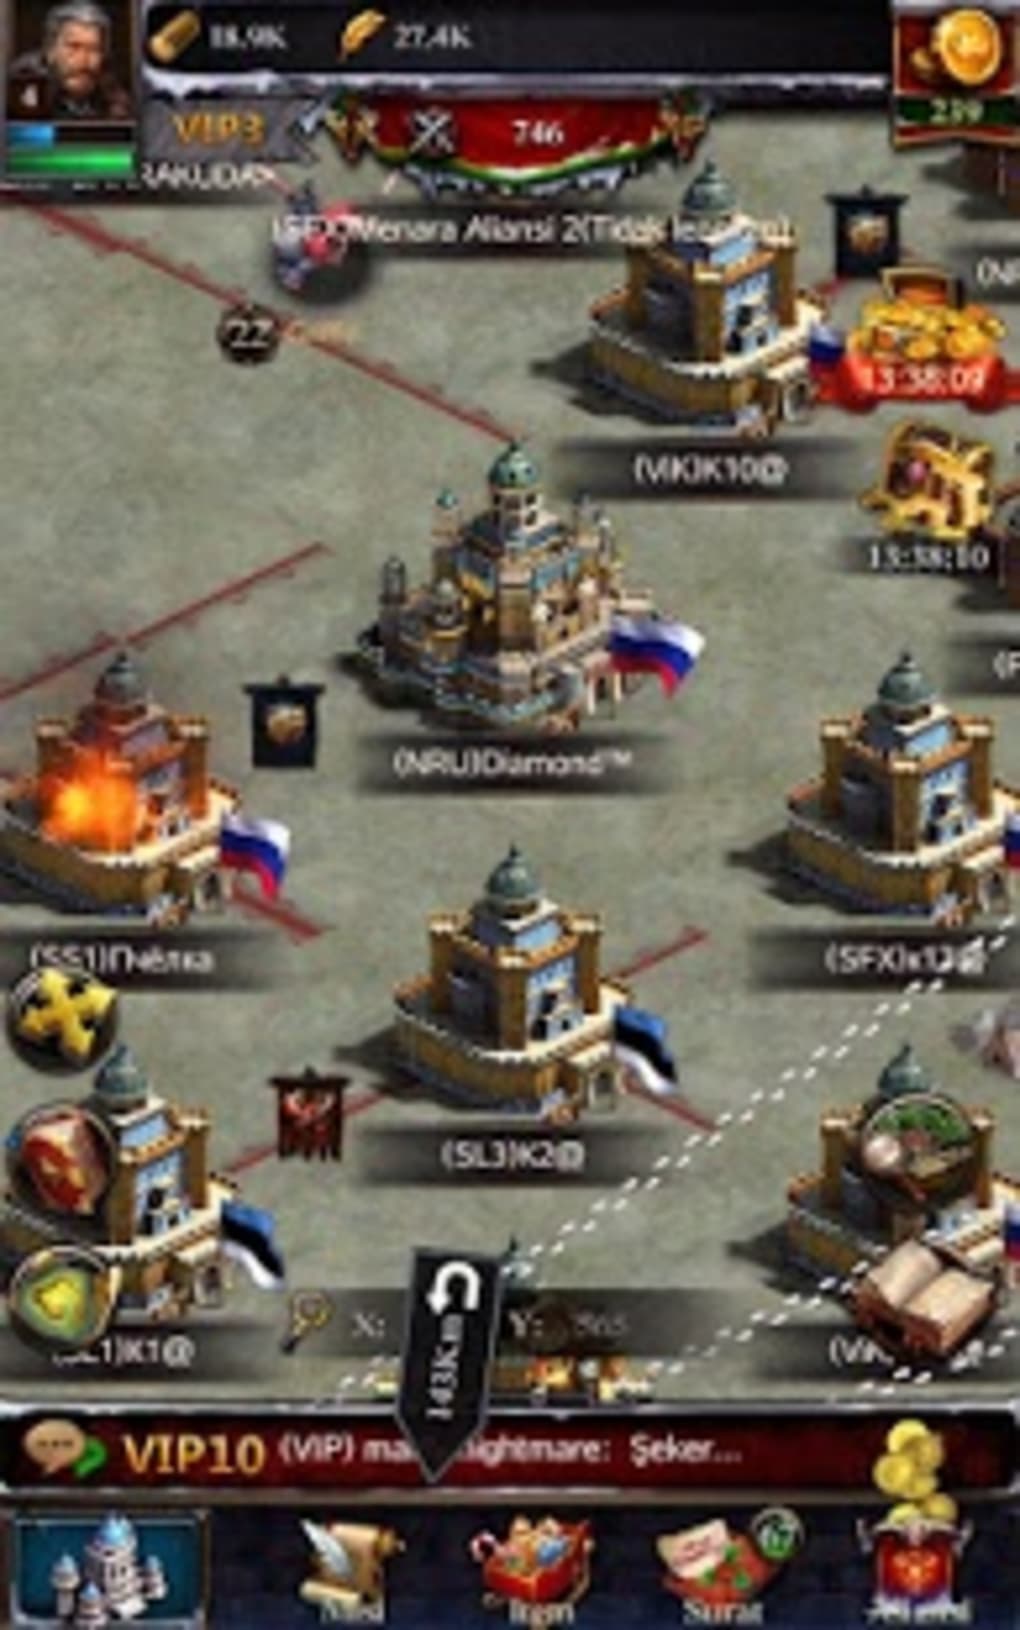 Clash of Kings:The West – Apps no Google Play